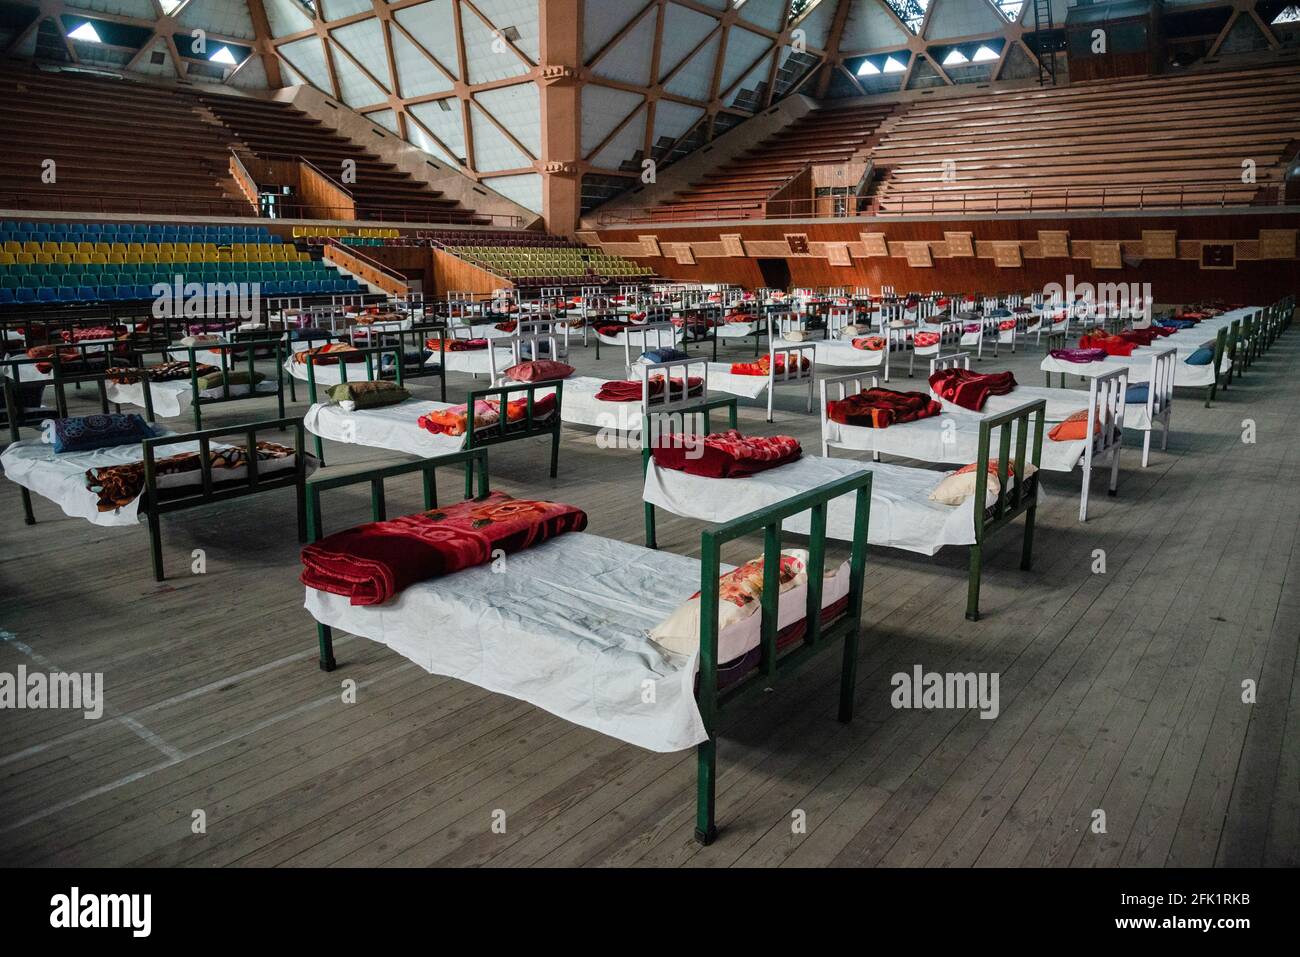 Srinagar, India. 27th Apr, 2021. Beds are placed to set up a Covid-19 isolation centre inside an indoor sports stadium in Srinagar. The Jammu and Kashmir reported 3,164 positive cases, highest ever since the outbreak of Covid-19 pandemic last year, pushing the number of active cases to 22,283 which otherwise were less than 600 around a month before. A 20 year old woman was reported among the Twenty five deaths in J&K in the last 24 hours taking the death toll to 2,197. (Photo by Idrees Abbas/SOPA Images/Sipa USA) Credit: Sipa USA/Alamy Live News Stock Photo